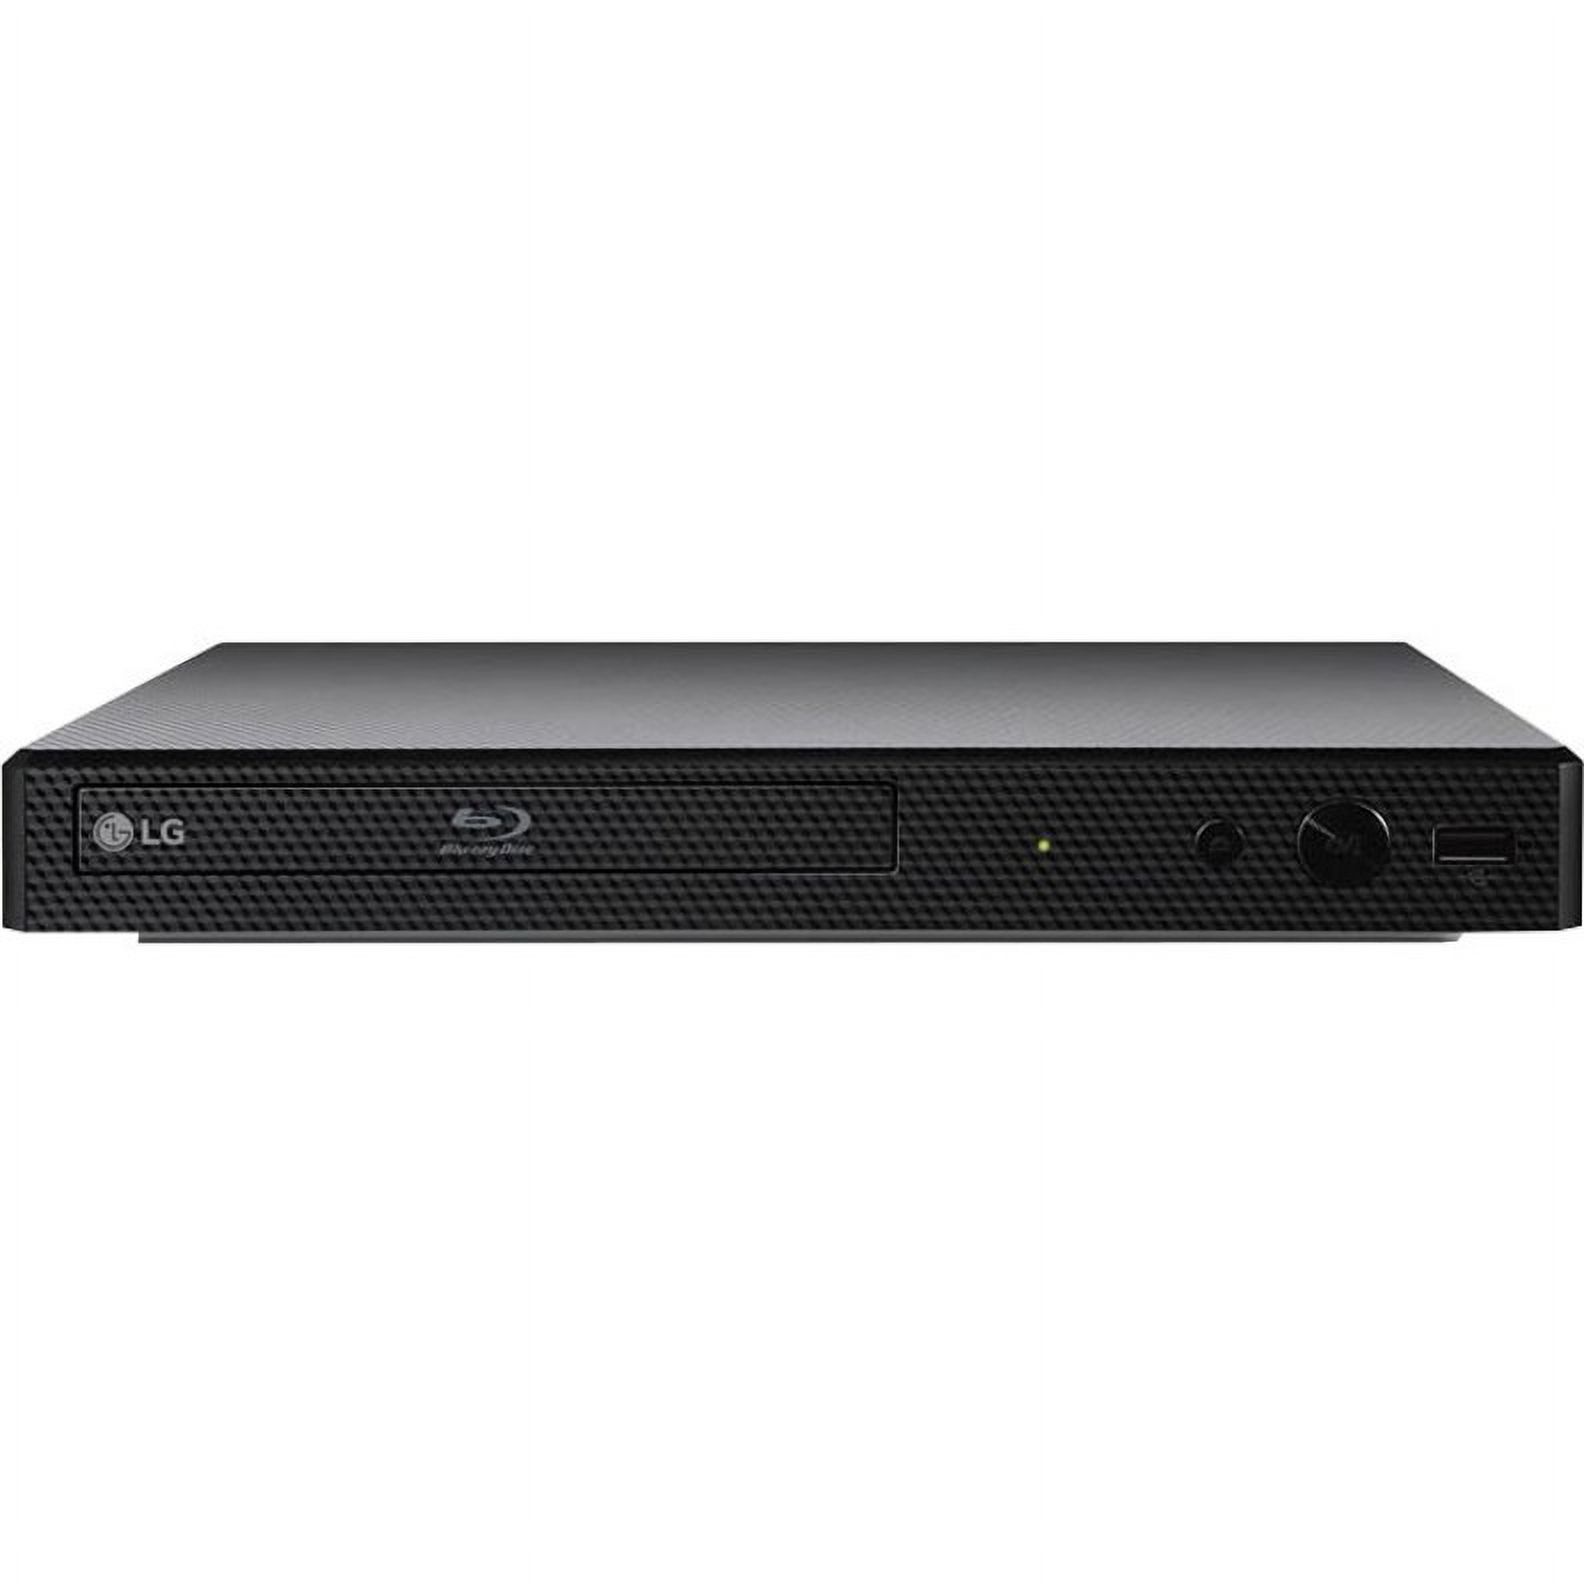 LG BP550 1 Disc(s) 3D Blu-ray Disc Player, 1080p - image 1 of 2